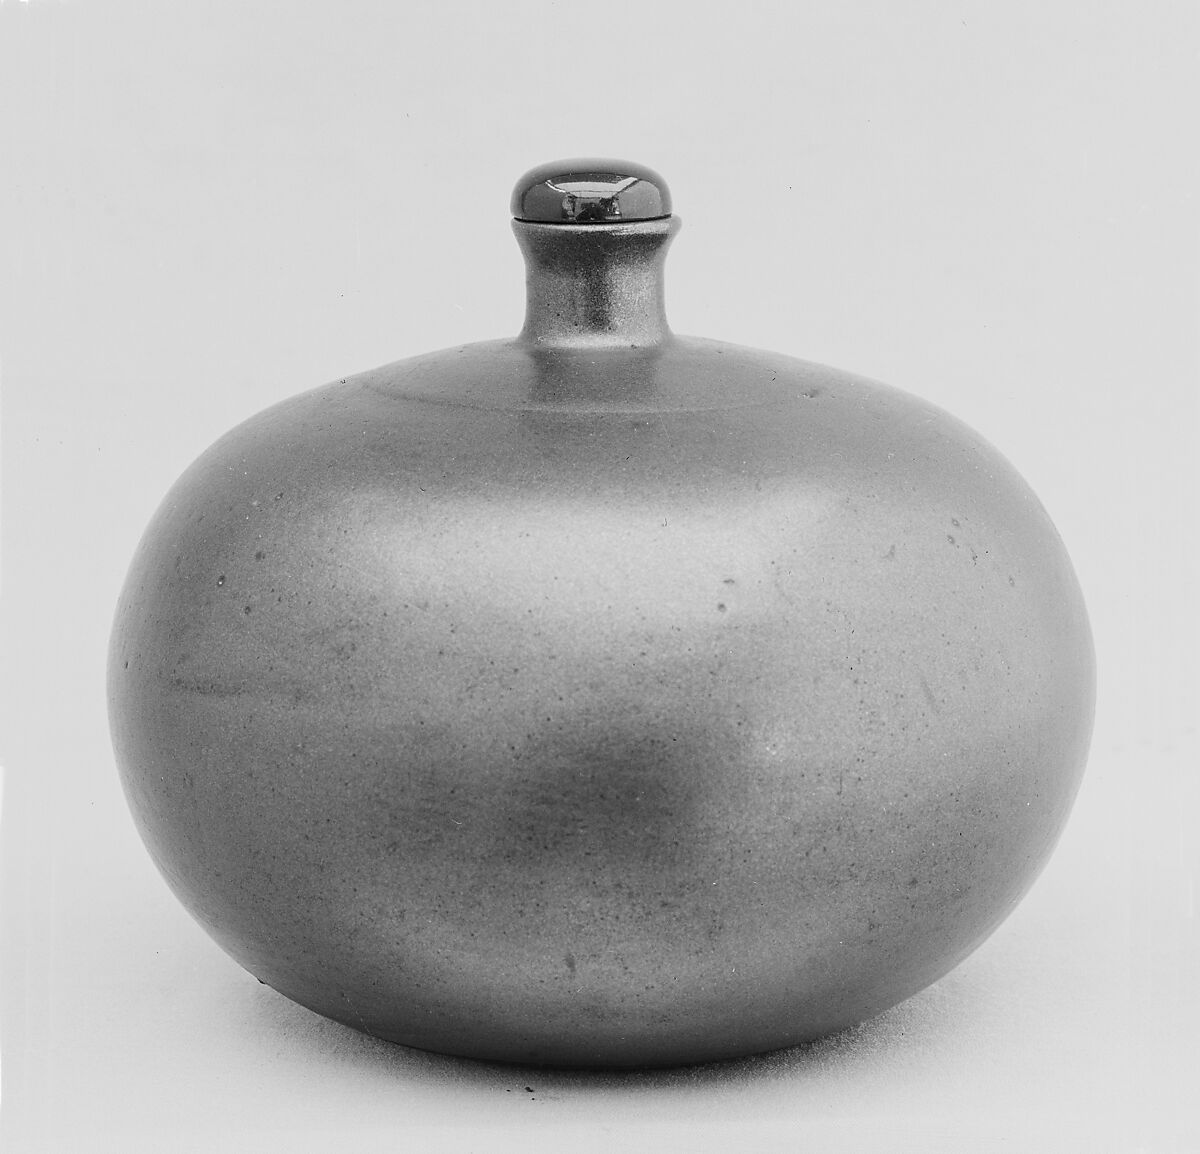 Bottle, Clay stained dark with lustrous glaze (Bizen ware, Imbe style), Japan 